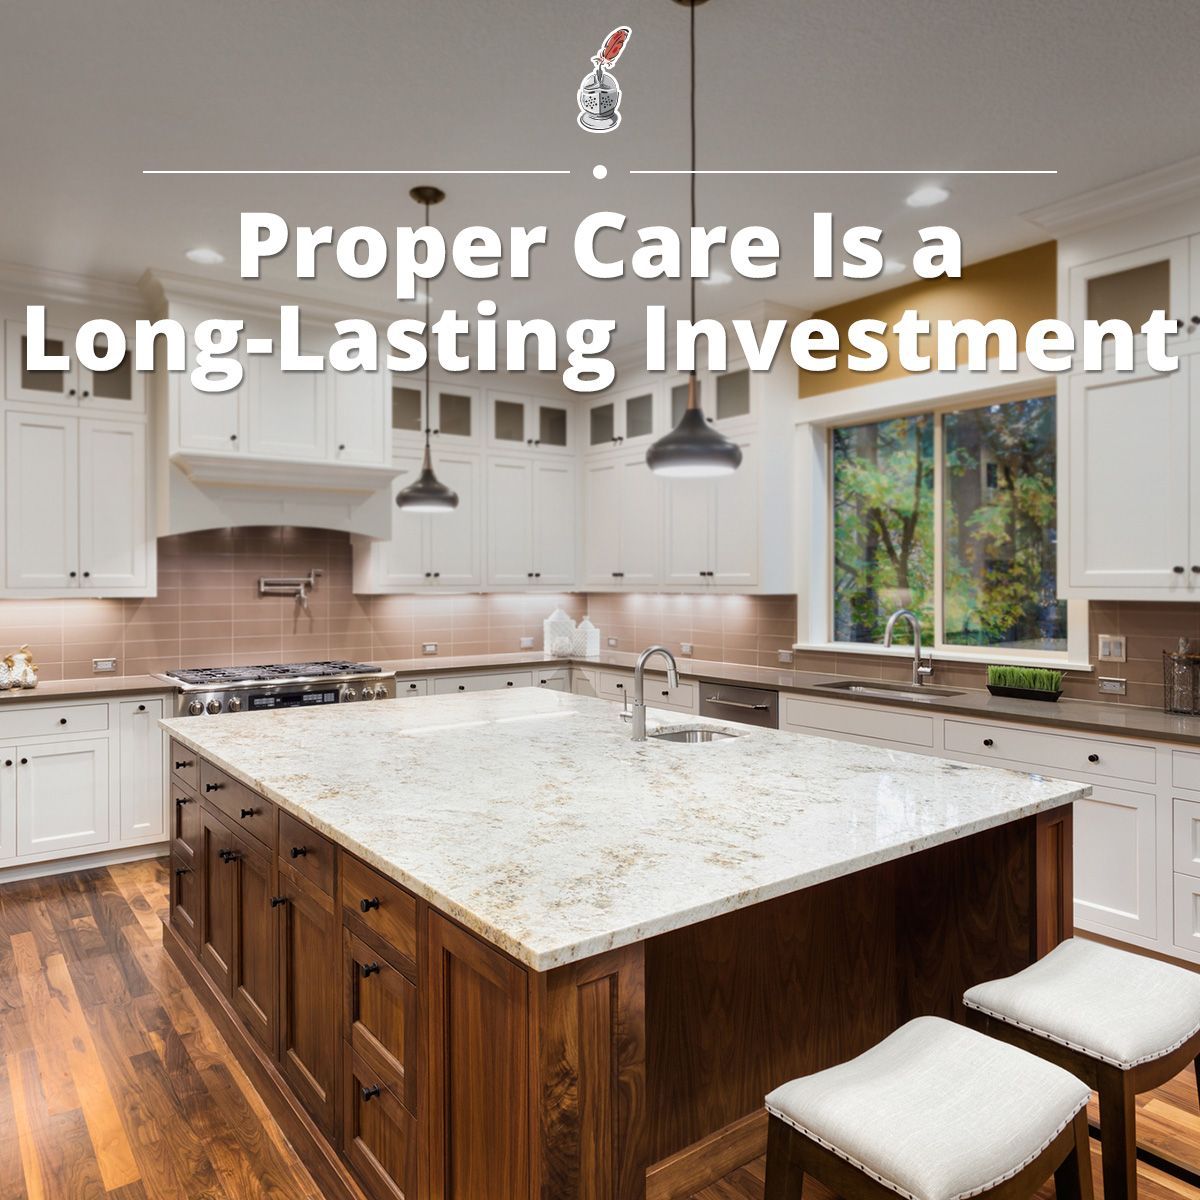 Proper Care Is a Long-Lasting Investment